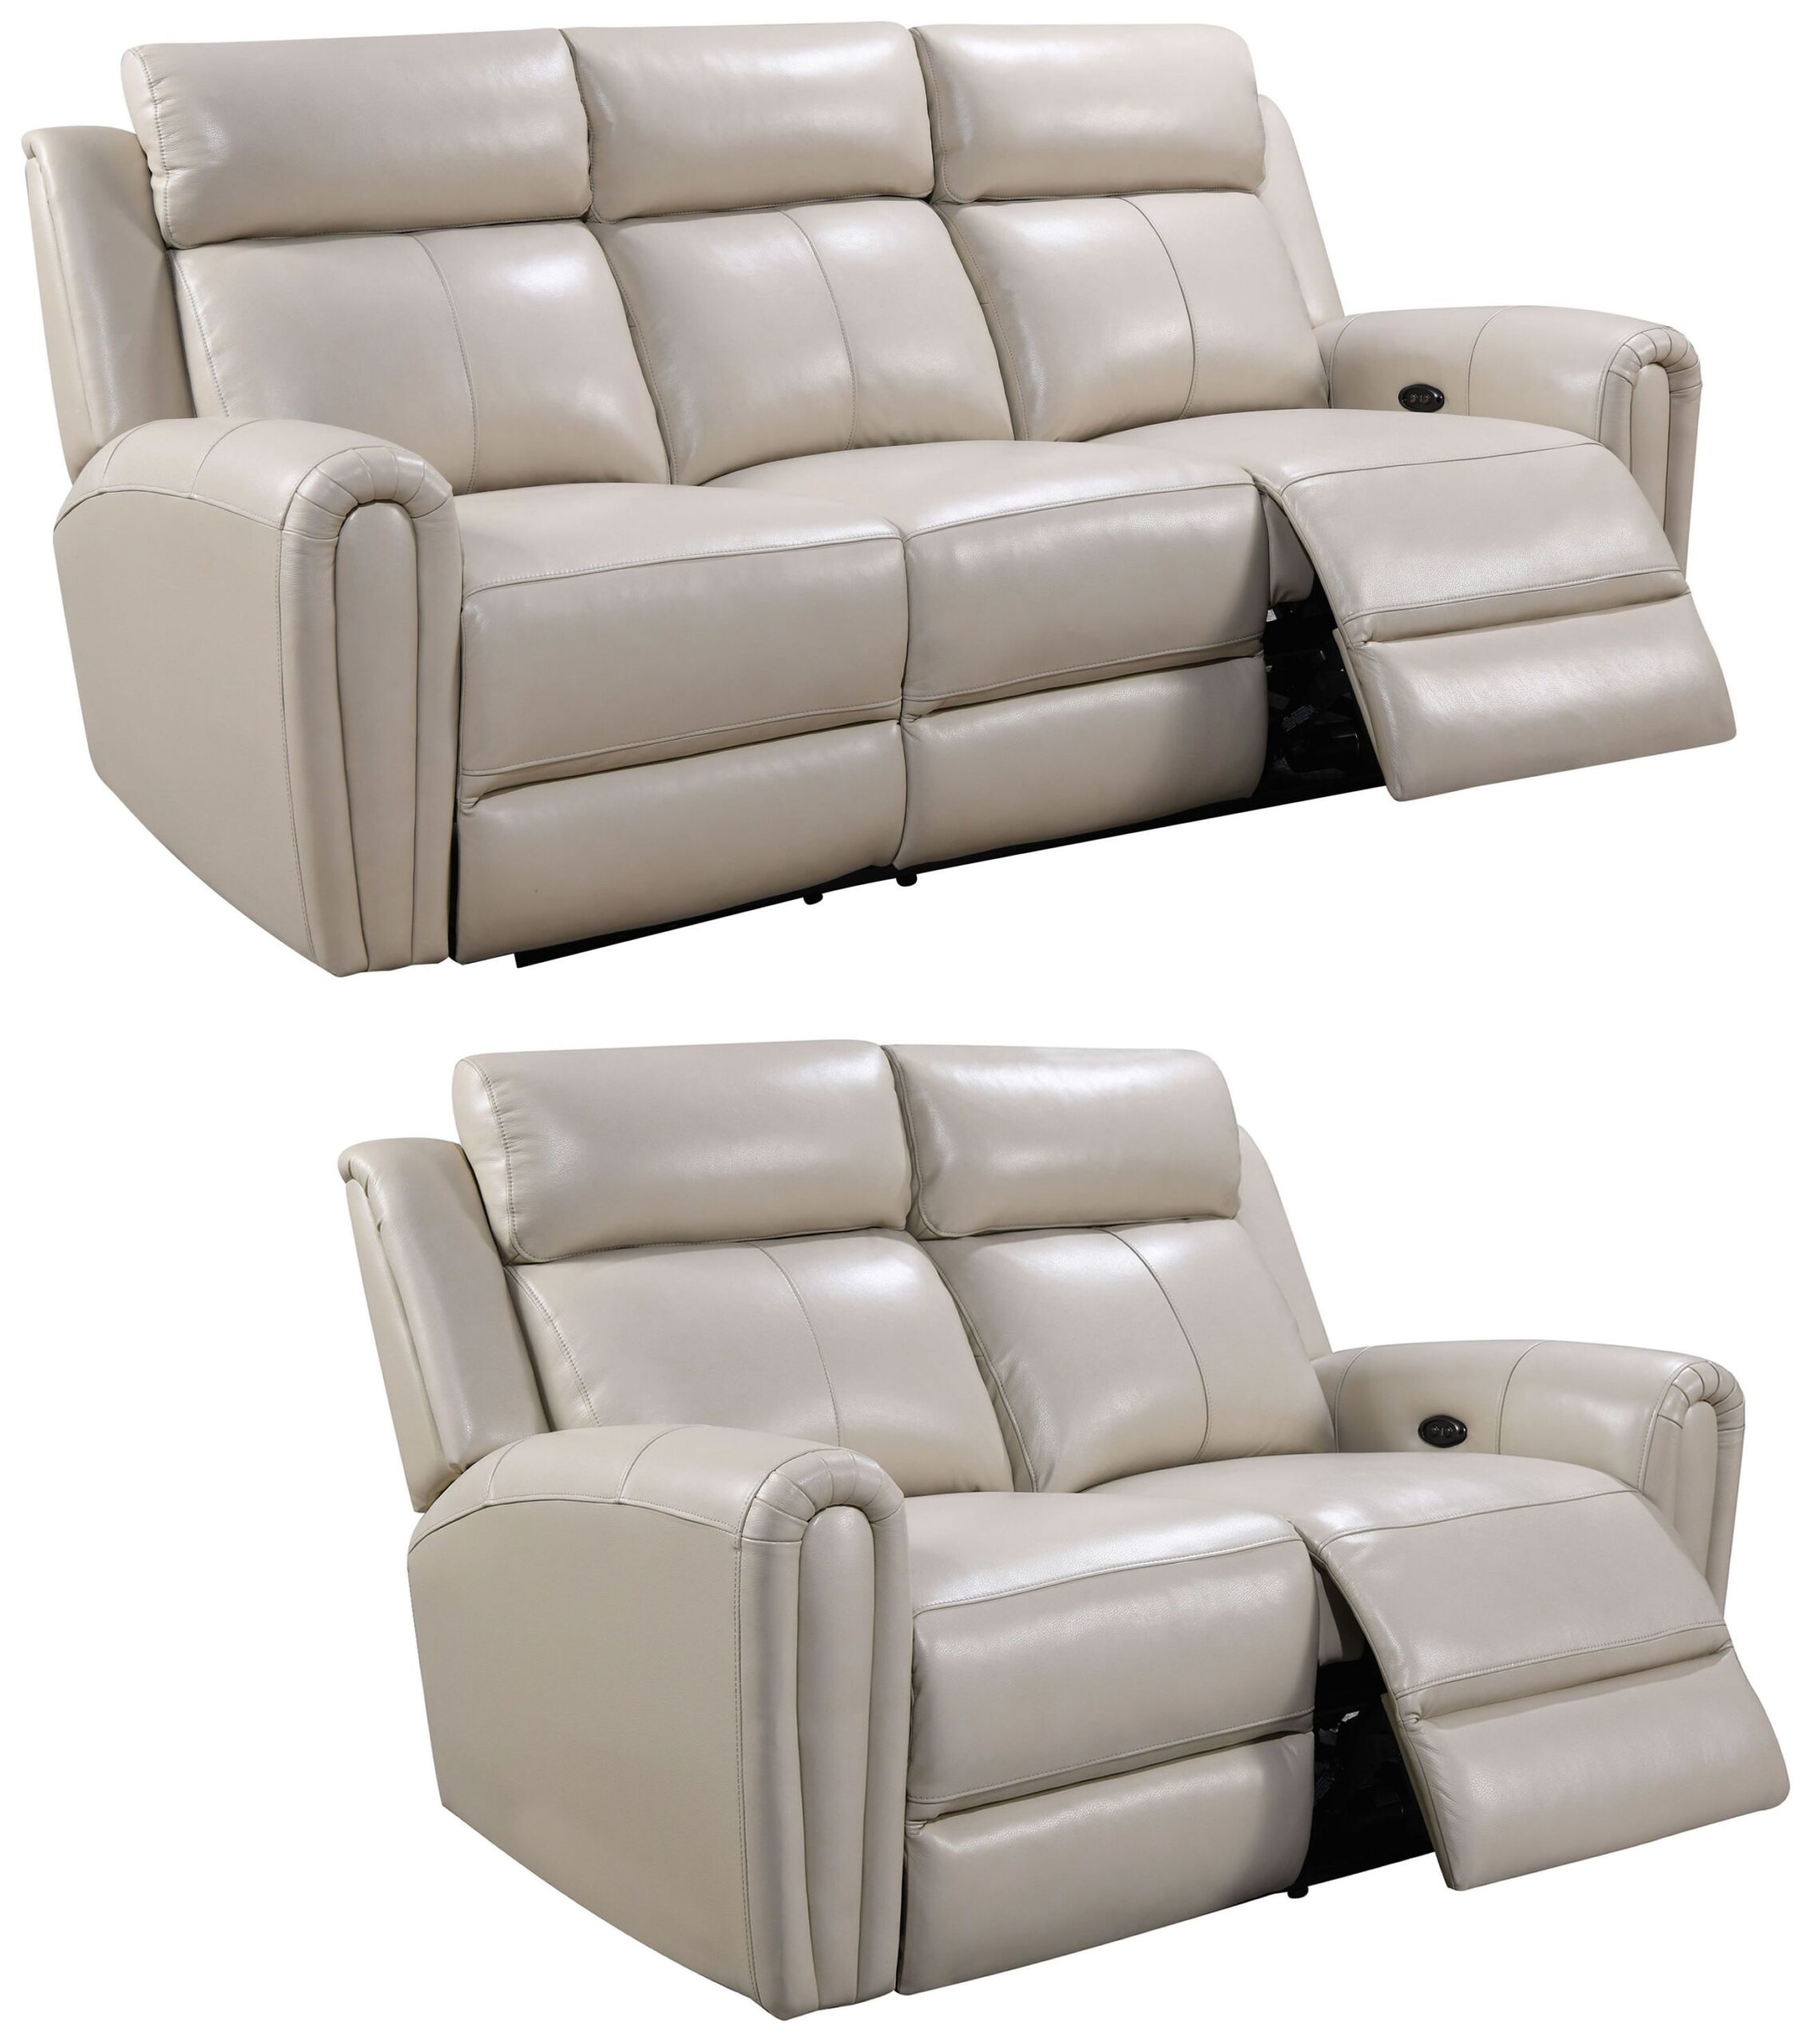 Upgrade Your Living Room with Luxurious Leather Recliner Sofa Sets